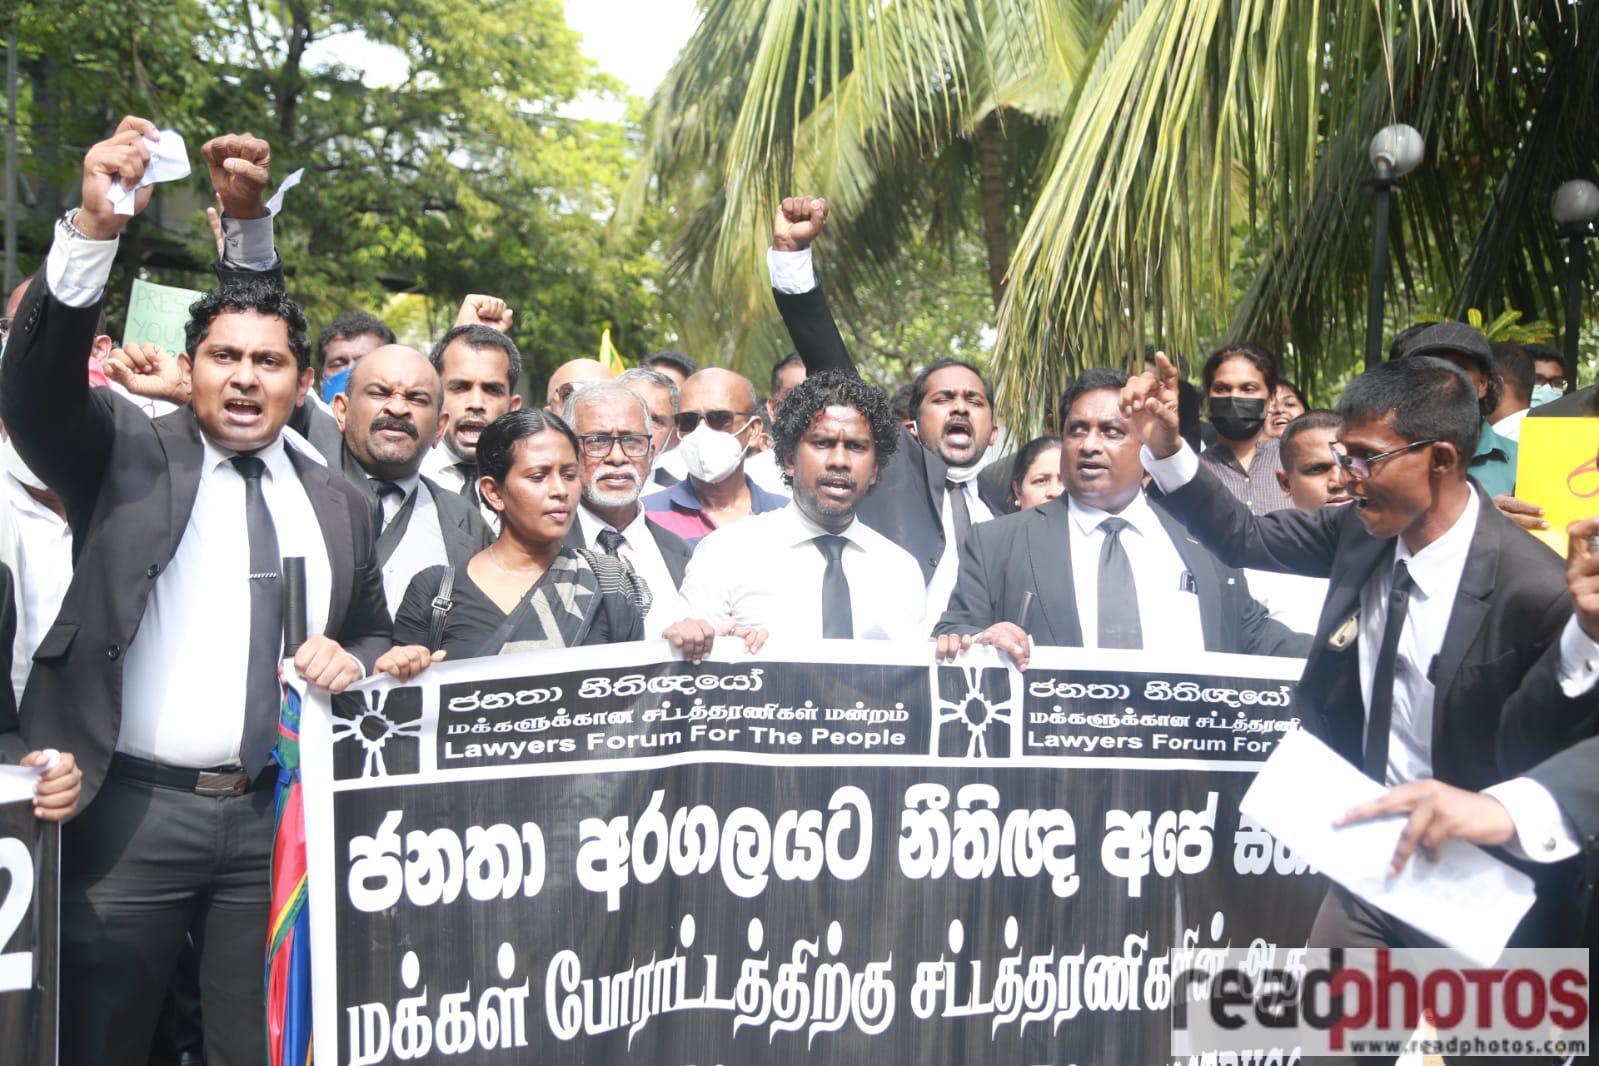 Lawyers join the public protest at Galleface - Read Photos